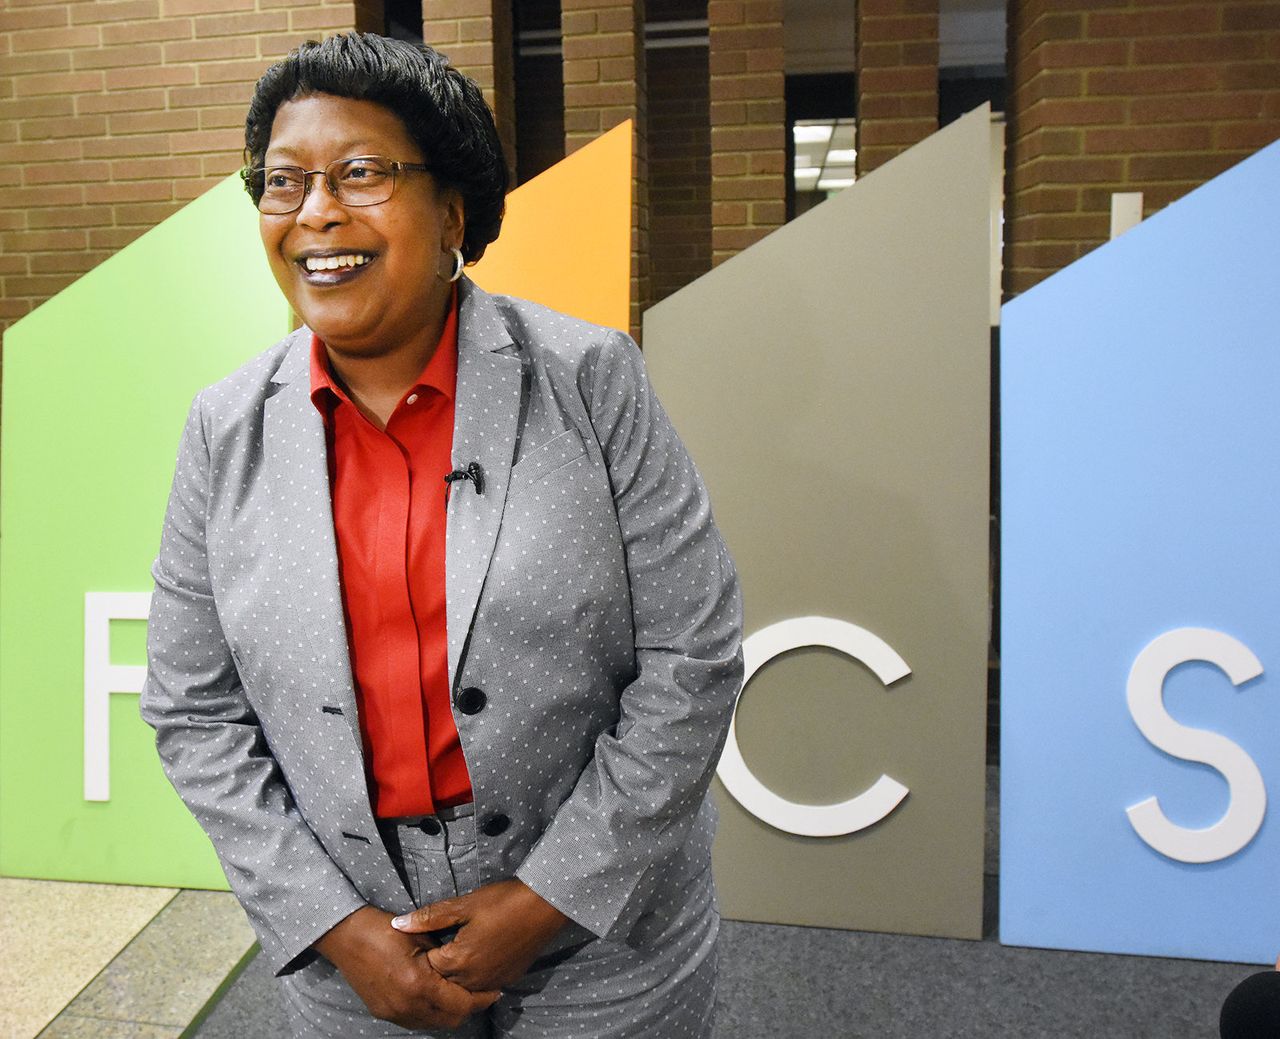 Wendy Robinson, superintendent of Fort Wayne Community Schools, called it "morally wrong to turn children into the objects of a business model."